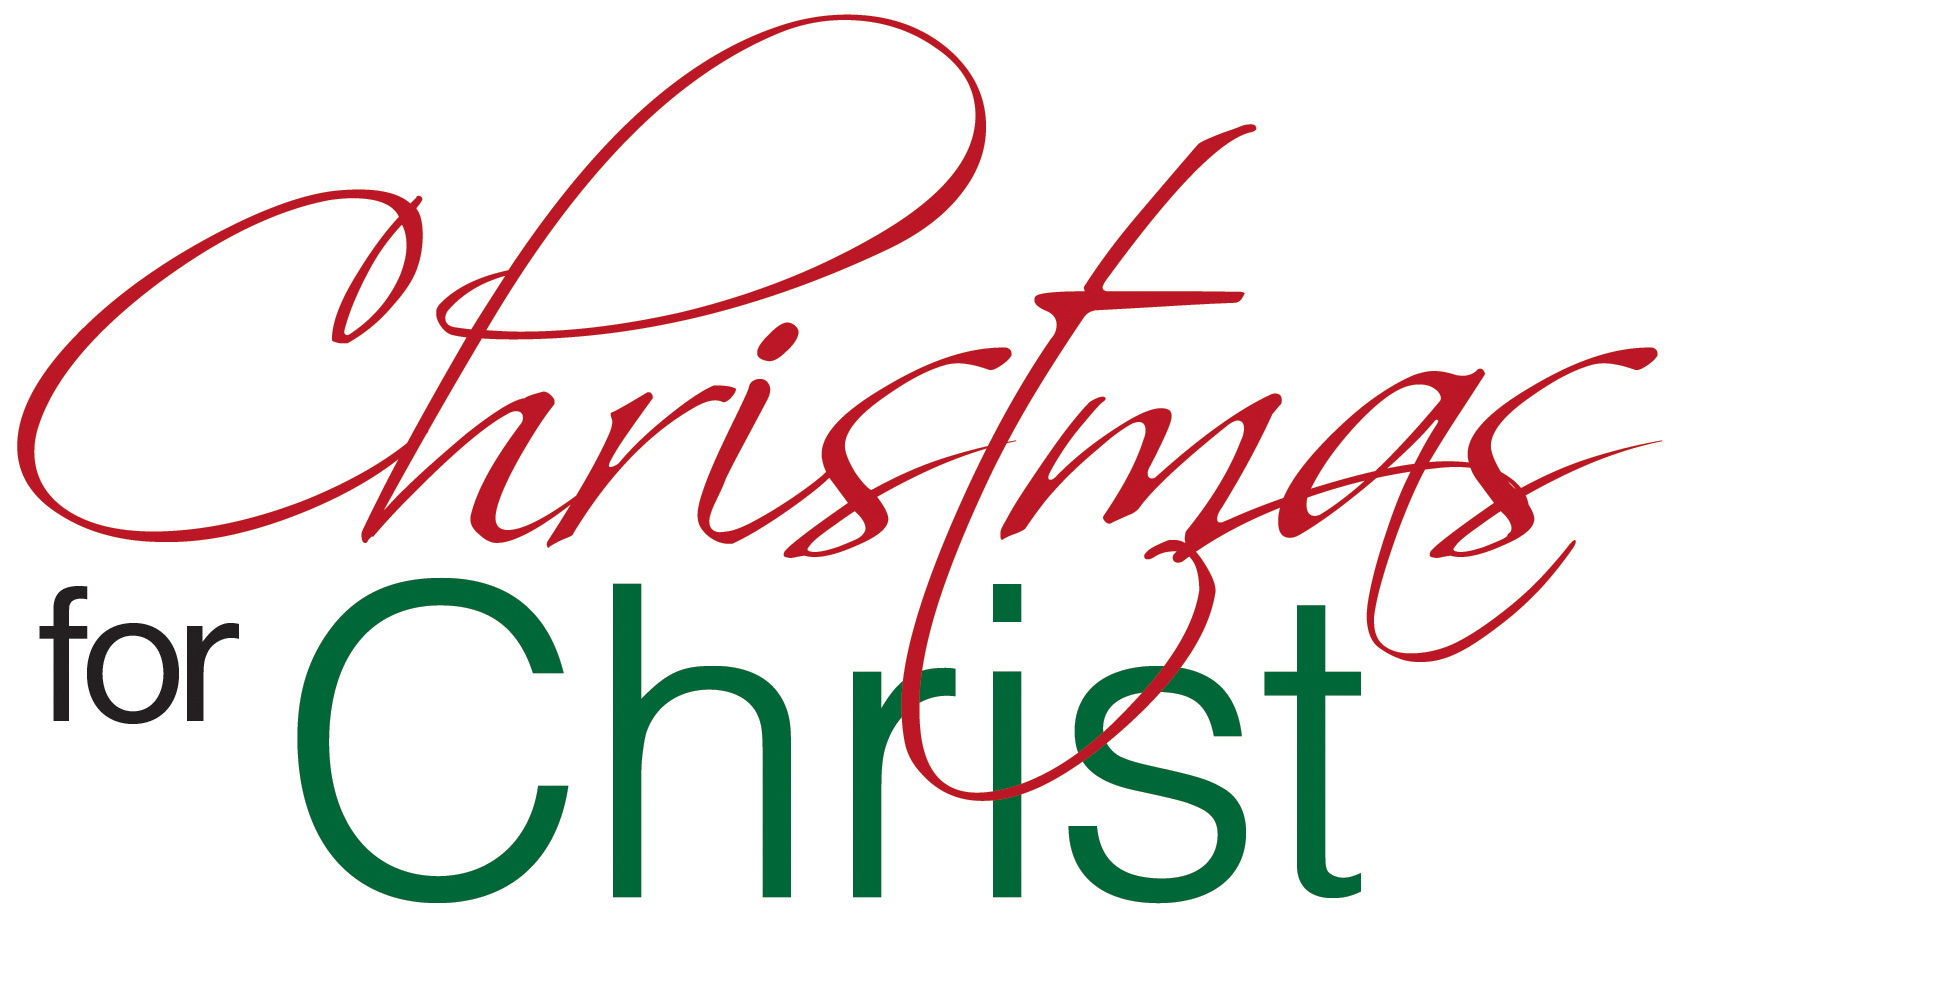 christmas images free clip art christian